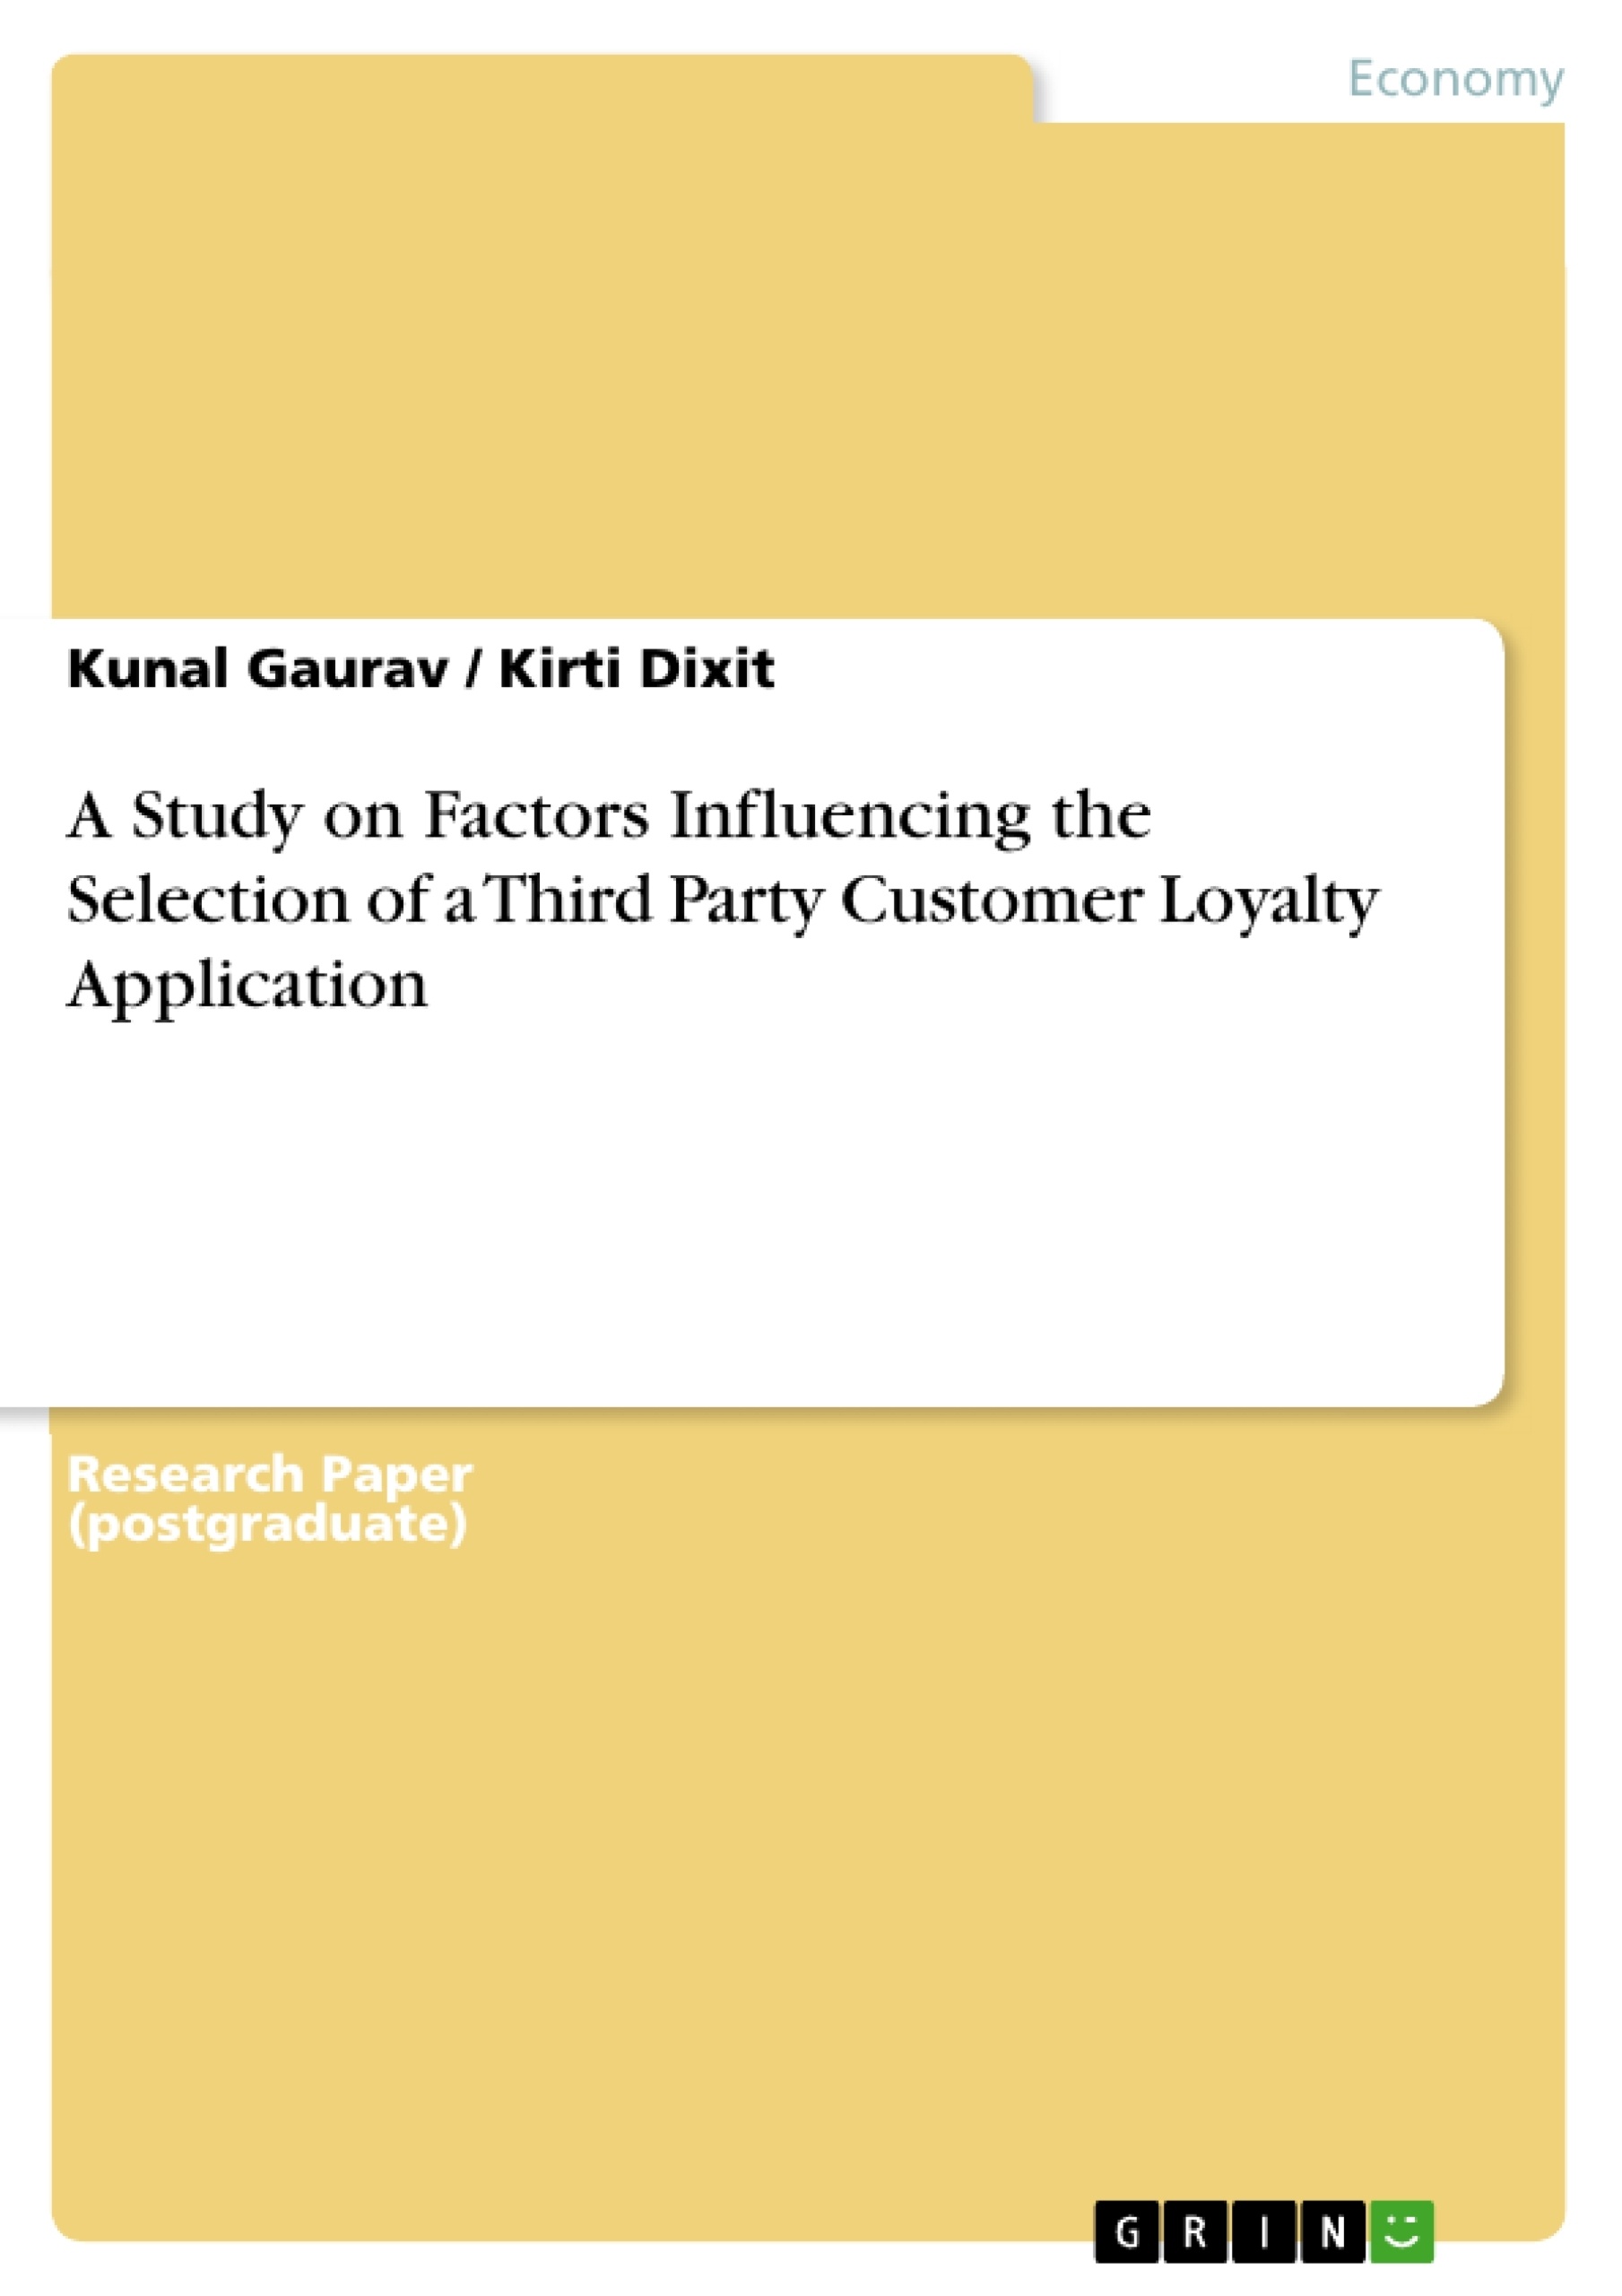 Title: A Study on Factors Influencing the Selection of a Third Party Customer Loyalty Application